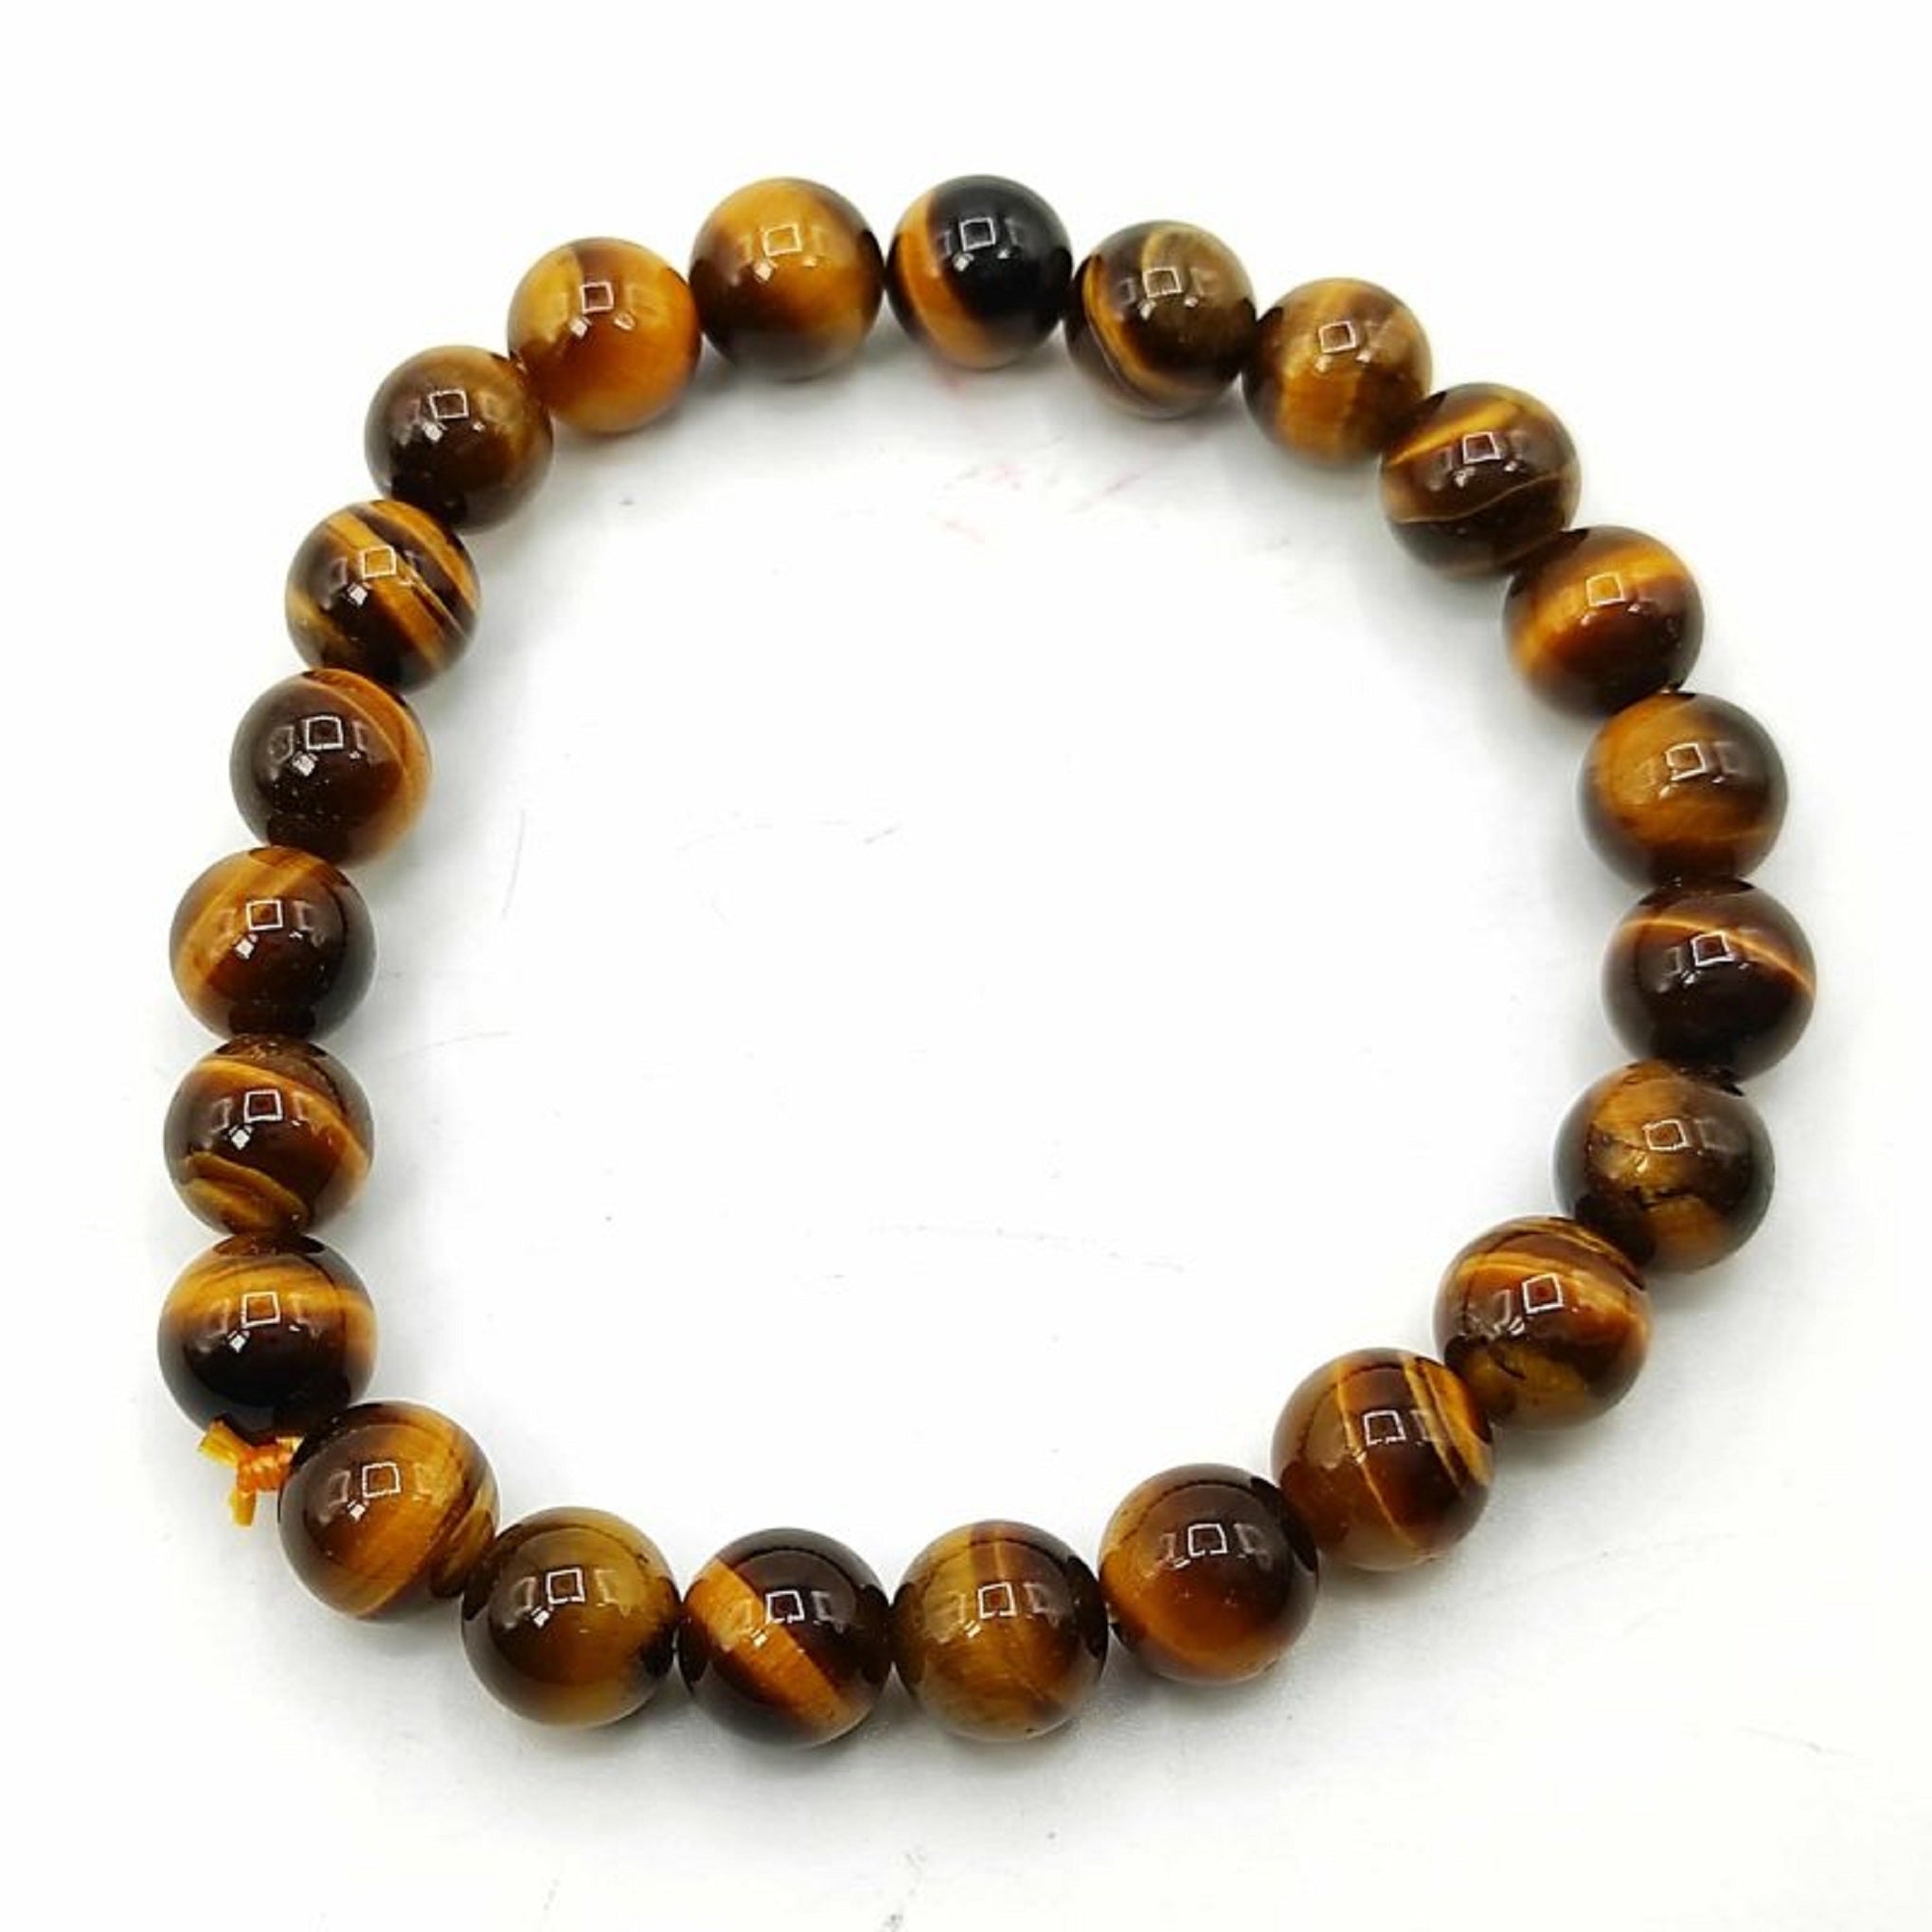 Tiger's Eye: Meaning, Healing Properties & Powers - The Complete Guide